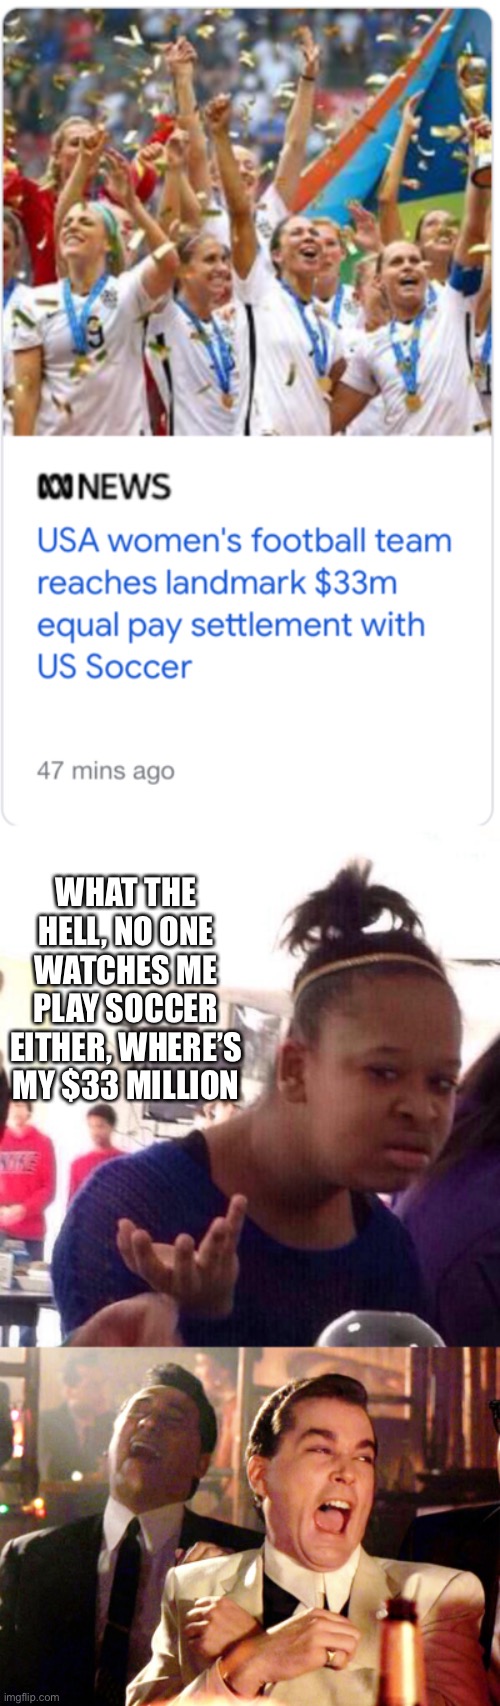 no one |  WHAT THE HELL, NO ONE WATCHES ME PLAY SOCCER EITHER, WHERE’S MY $33 MILLION | image tagged in memes,black girl wat,good fellas hilarious | made w/ Imgflip meme maker